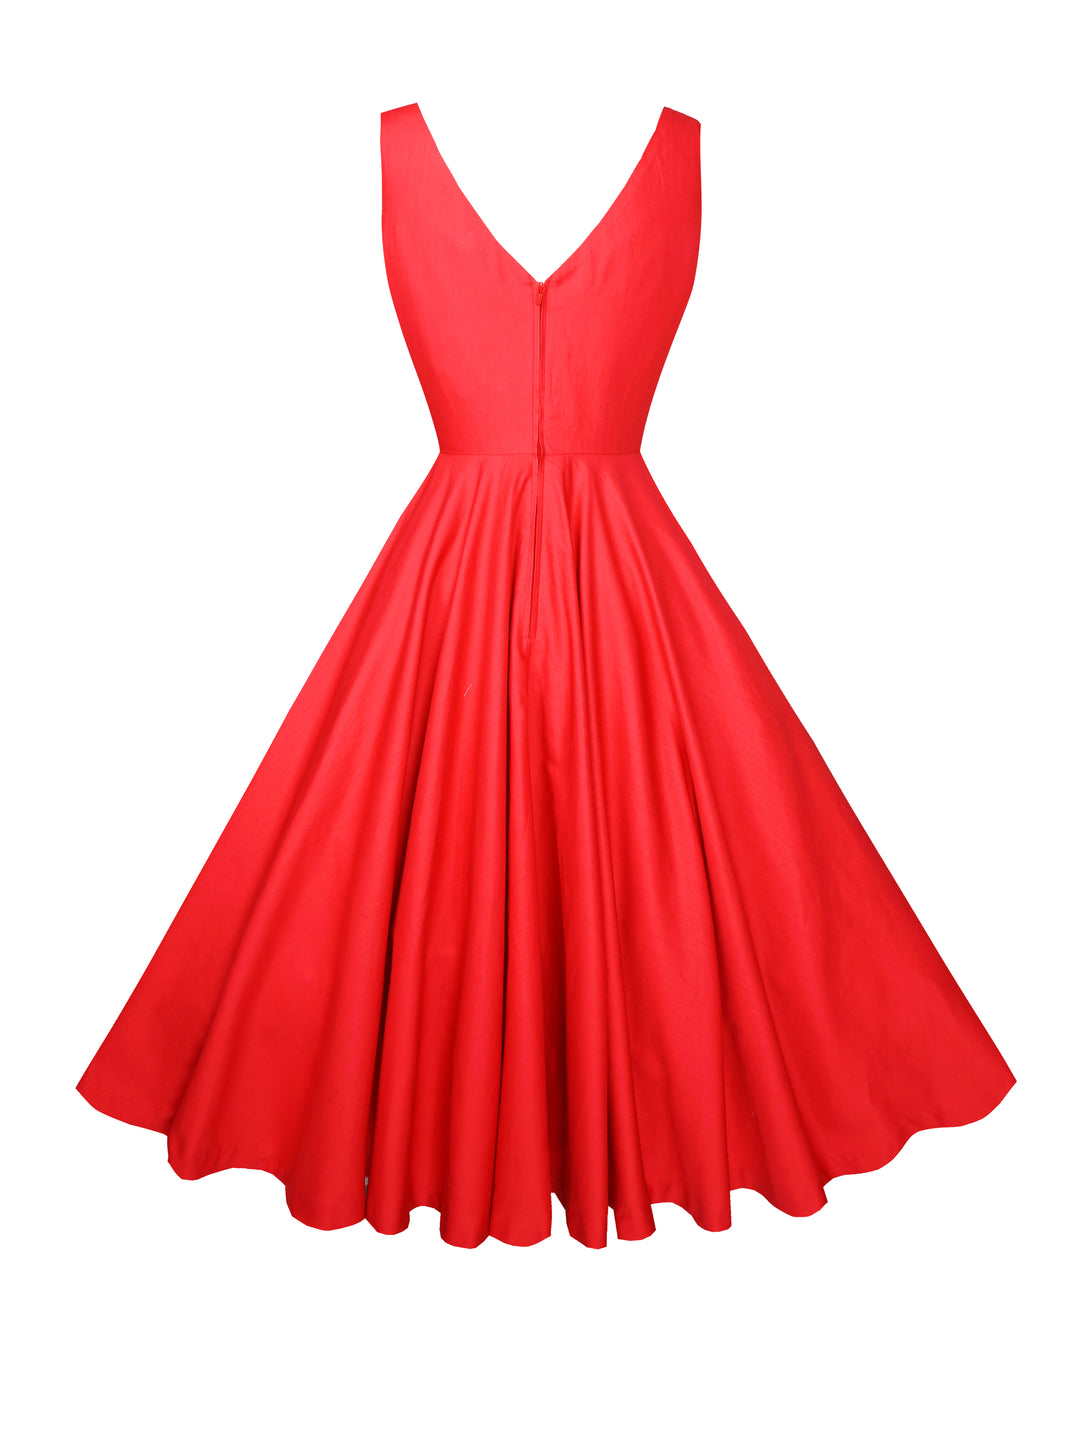 MTO - Diana Dress in Cardinal Red Cotton